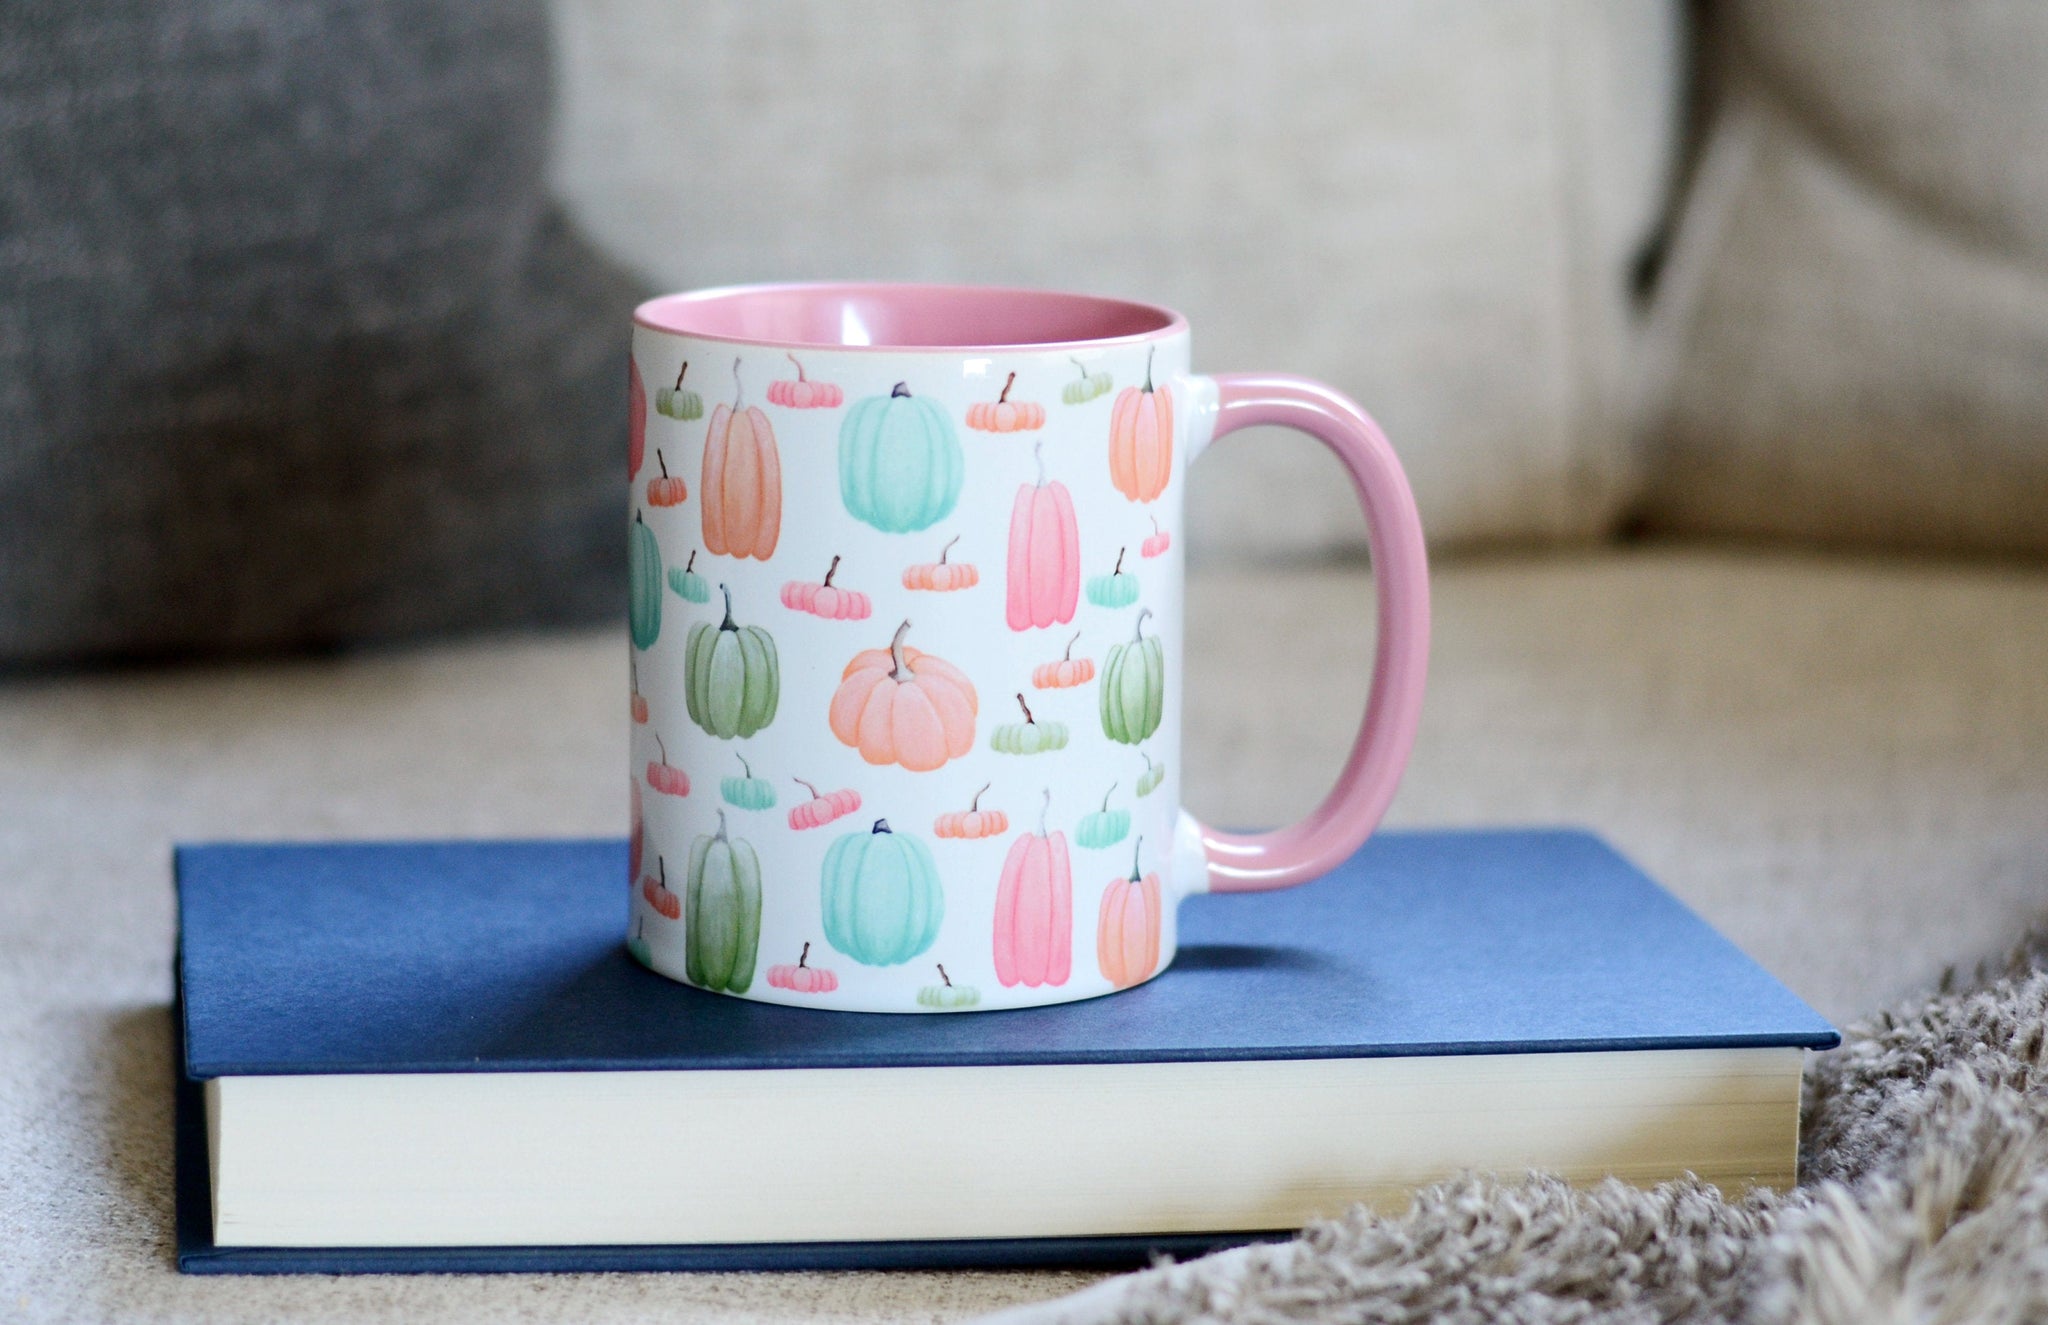 ceramic mug with pink handle and interior wrap around  pattern is hand painted pink green orange and blue pumpkin illustrations on white background